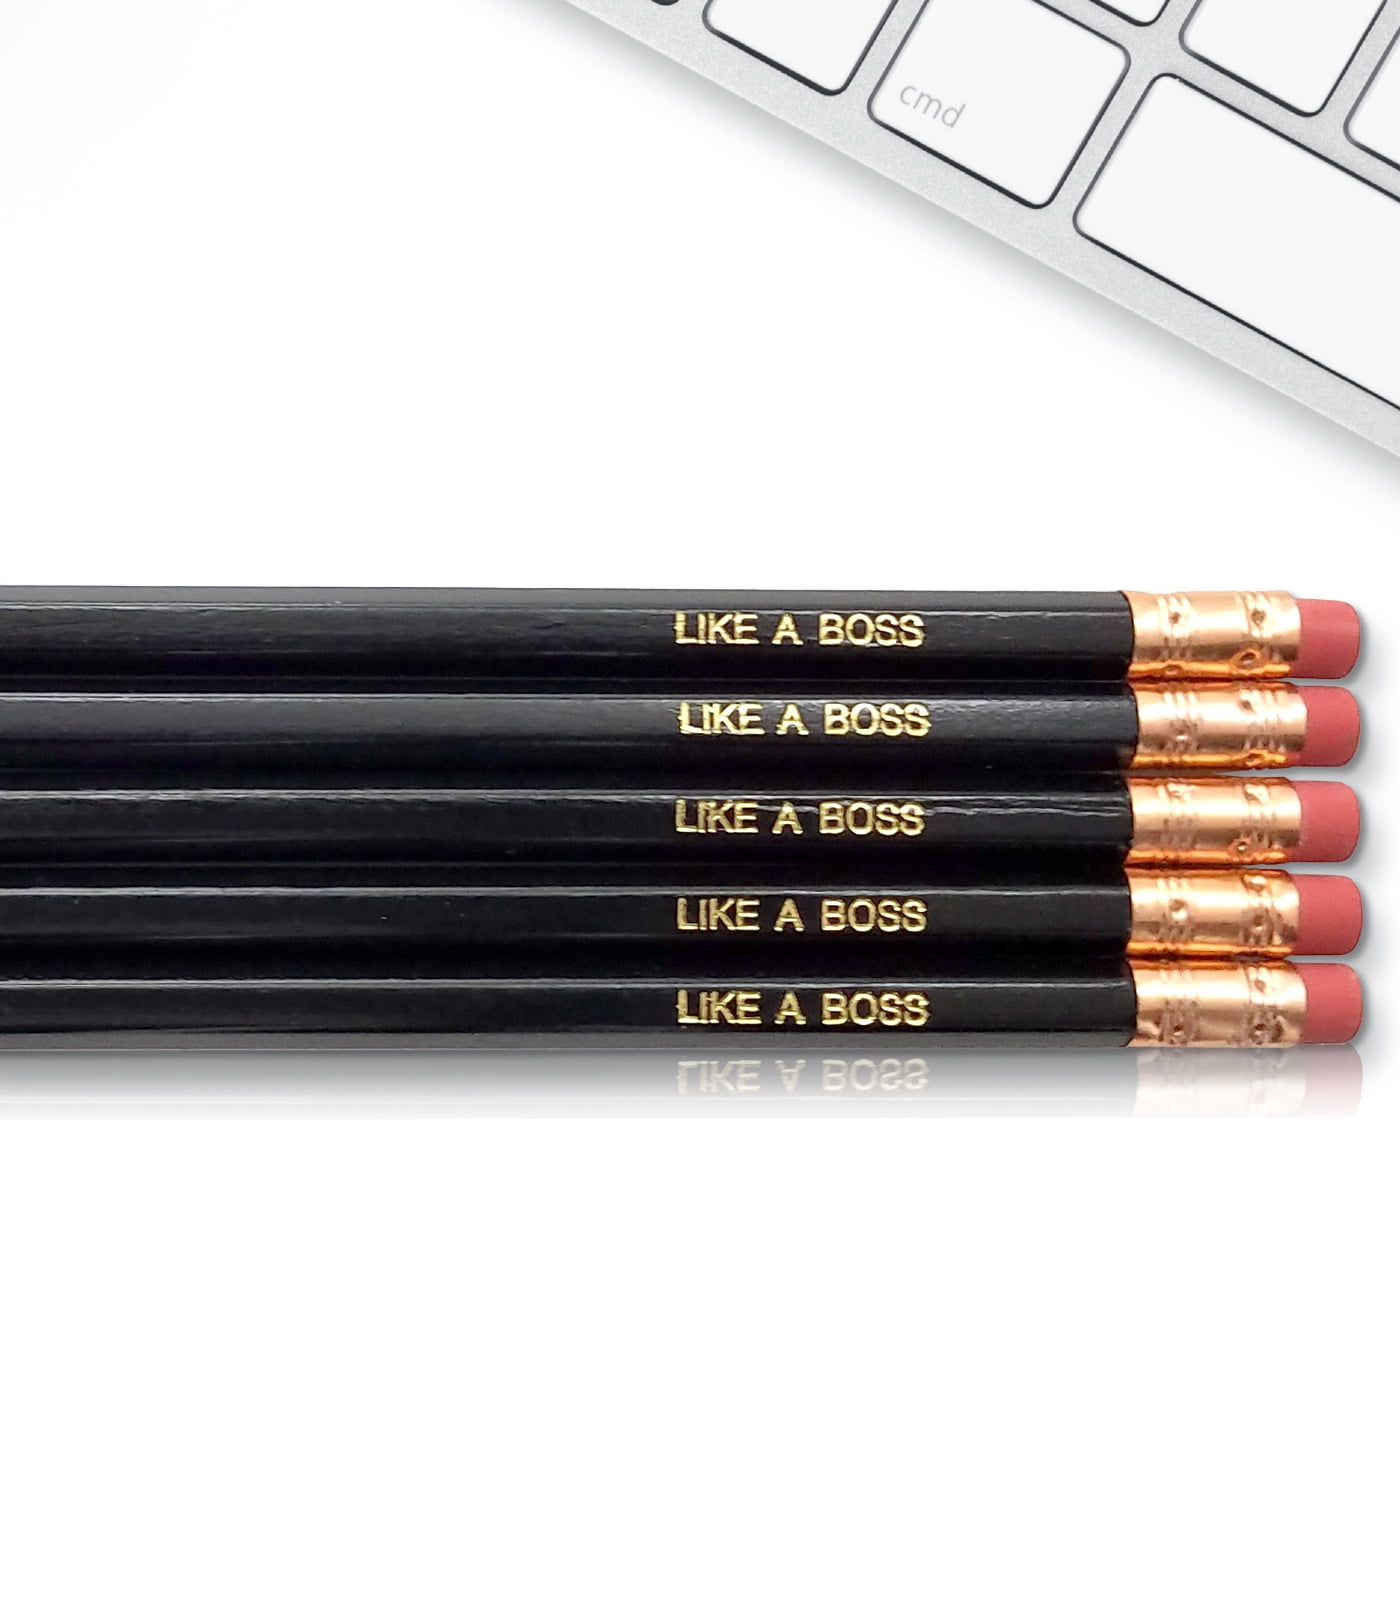 Inspirational Pencils Engraved With Funny And Motivational Sayings For School And The Office Schitts Creek 